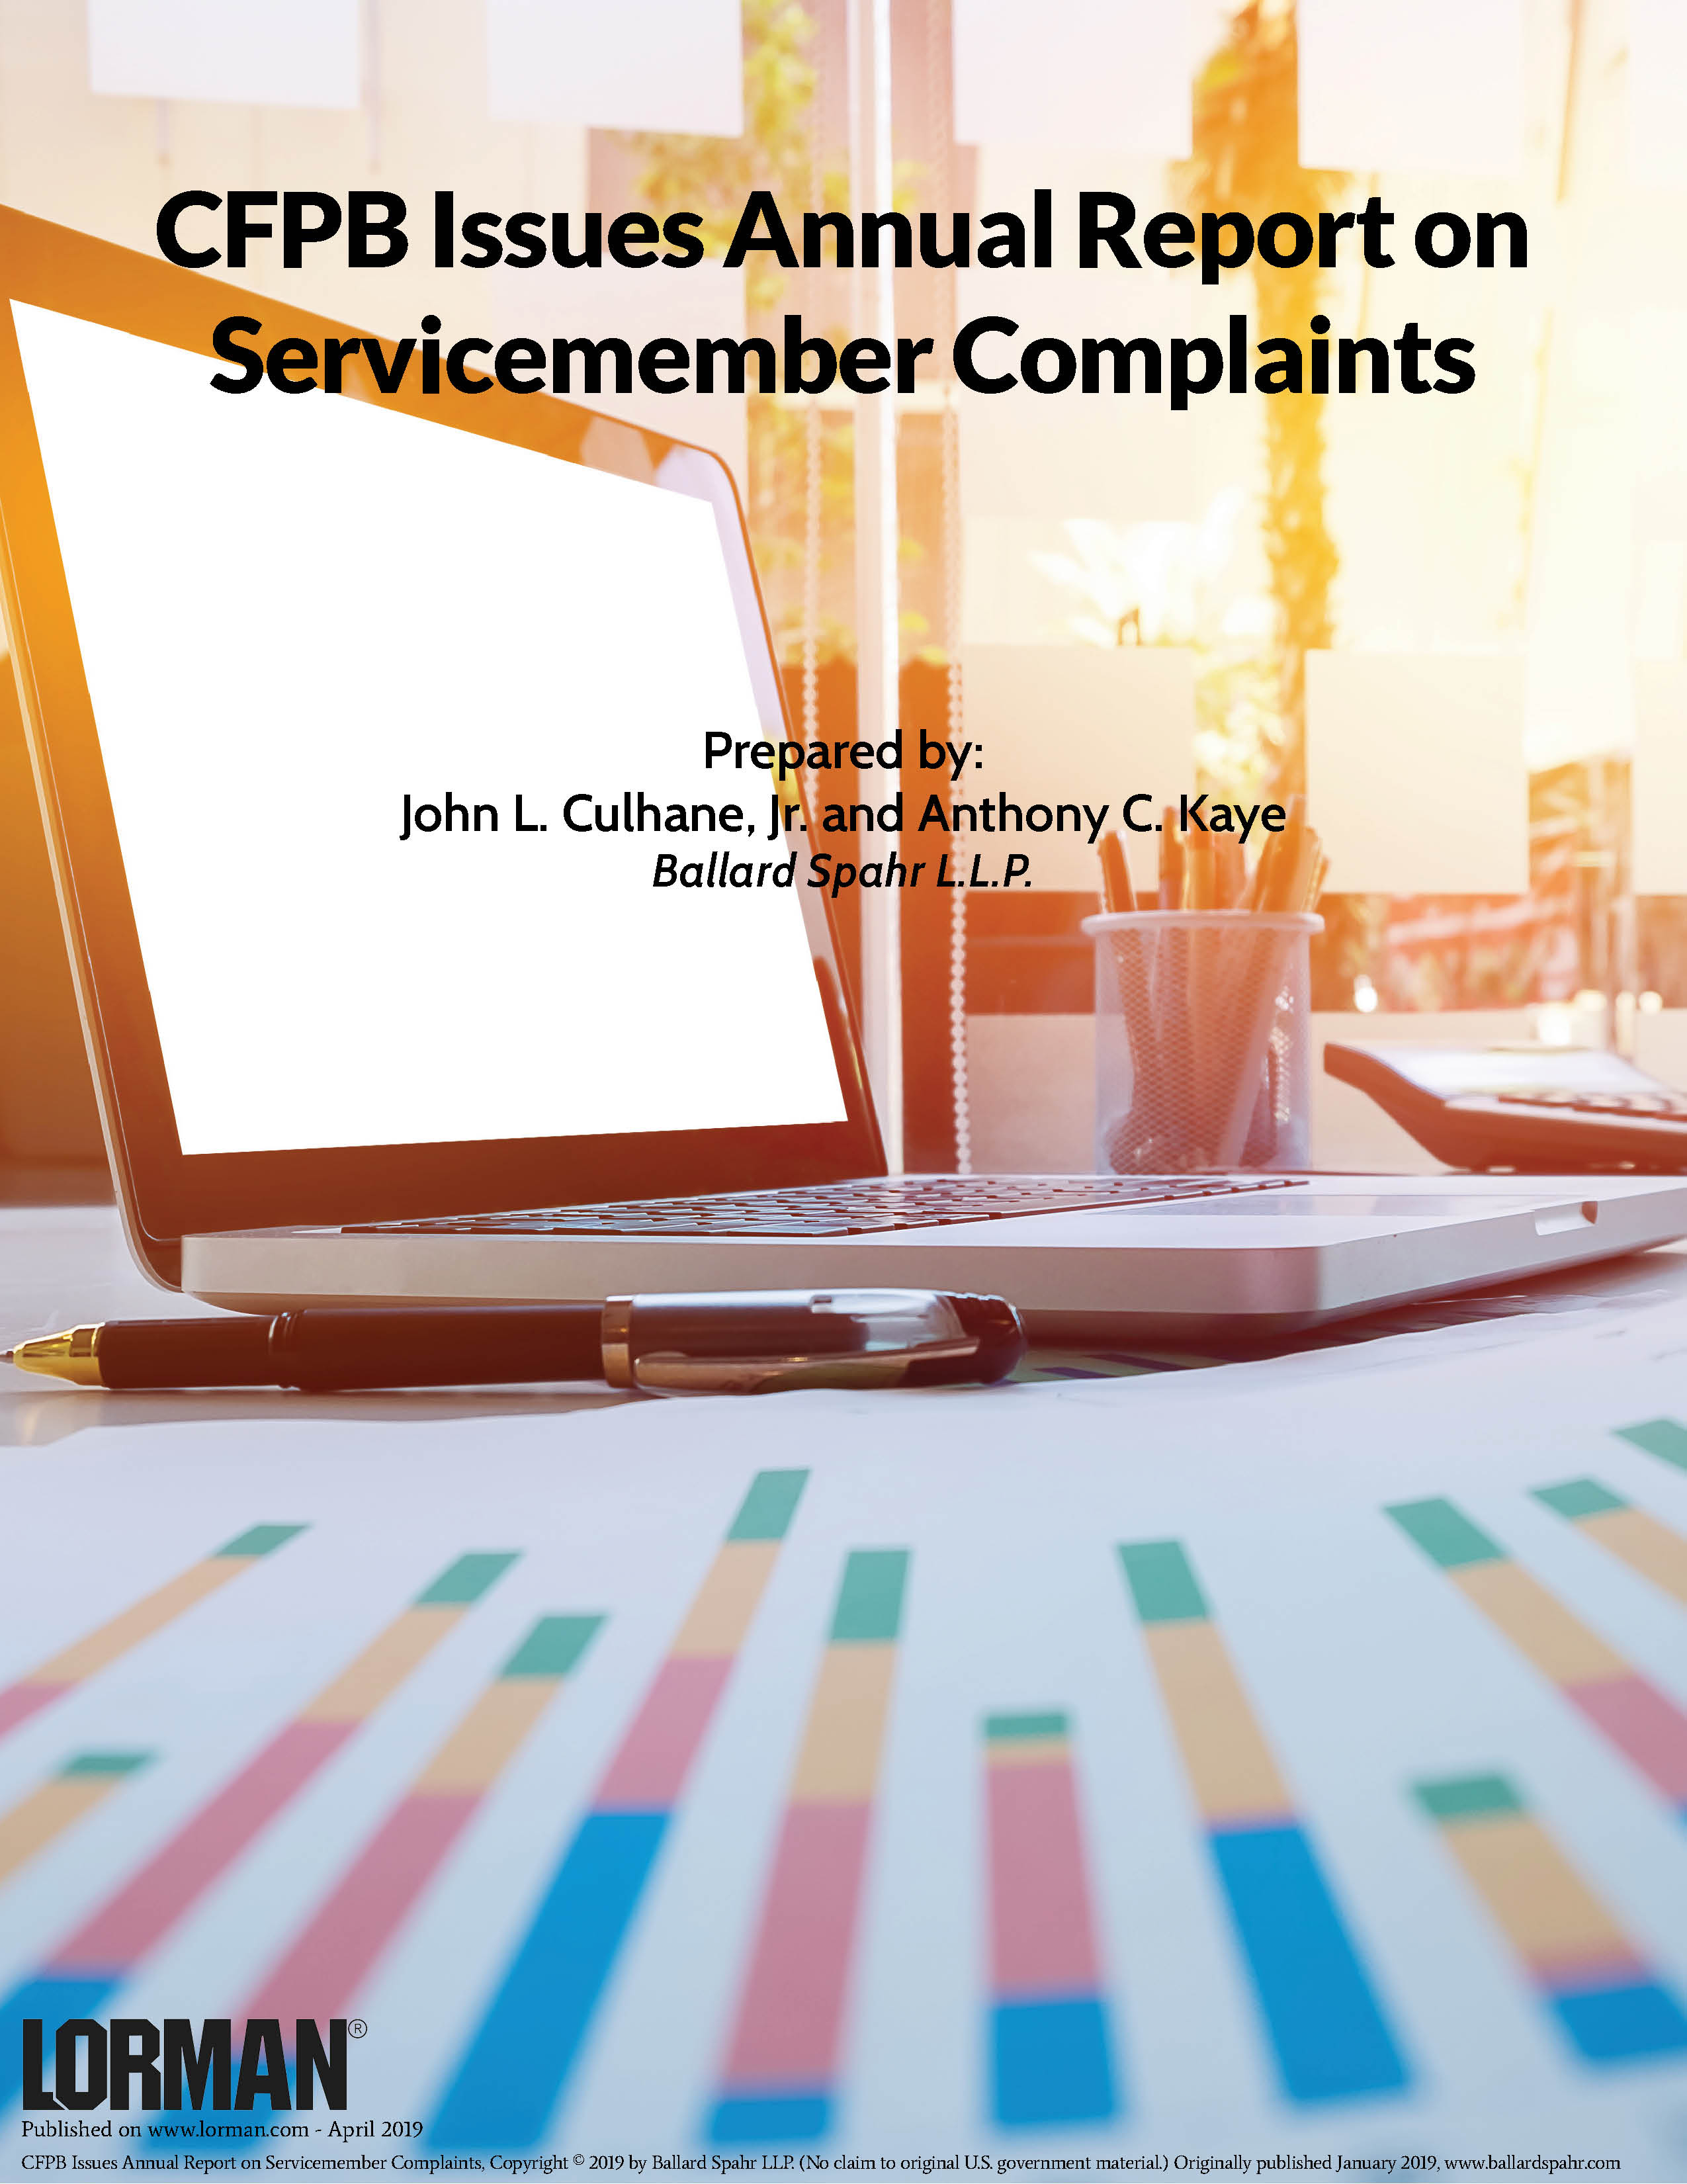 CFPB Issues Annual Report on Servicemember Complaints